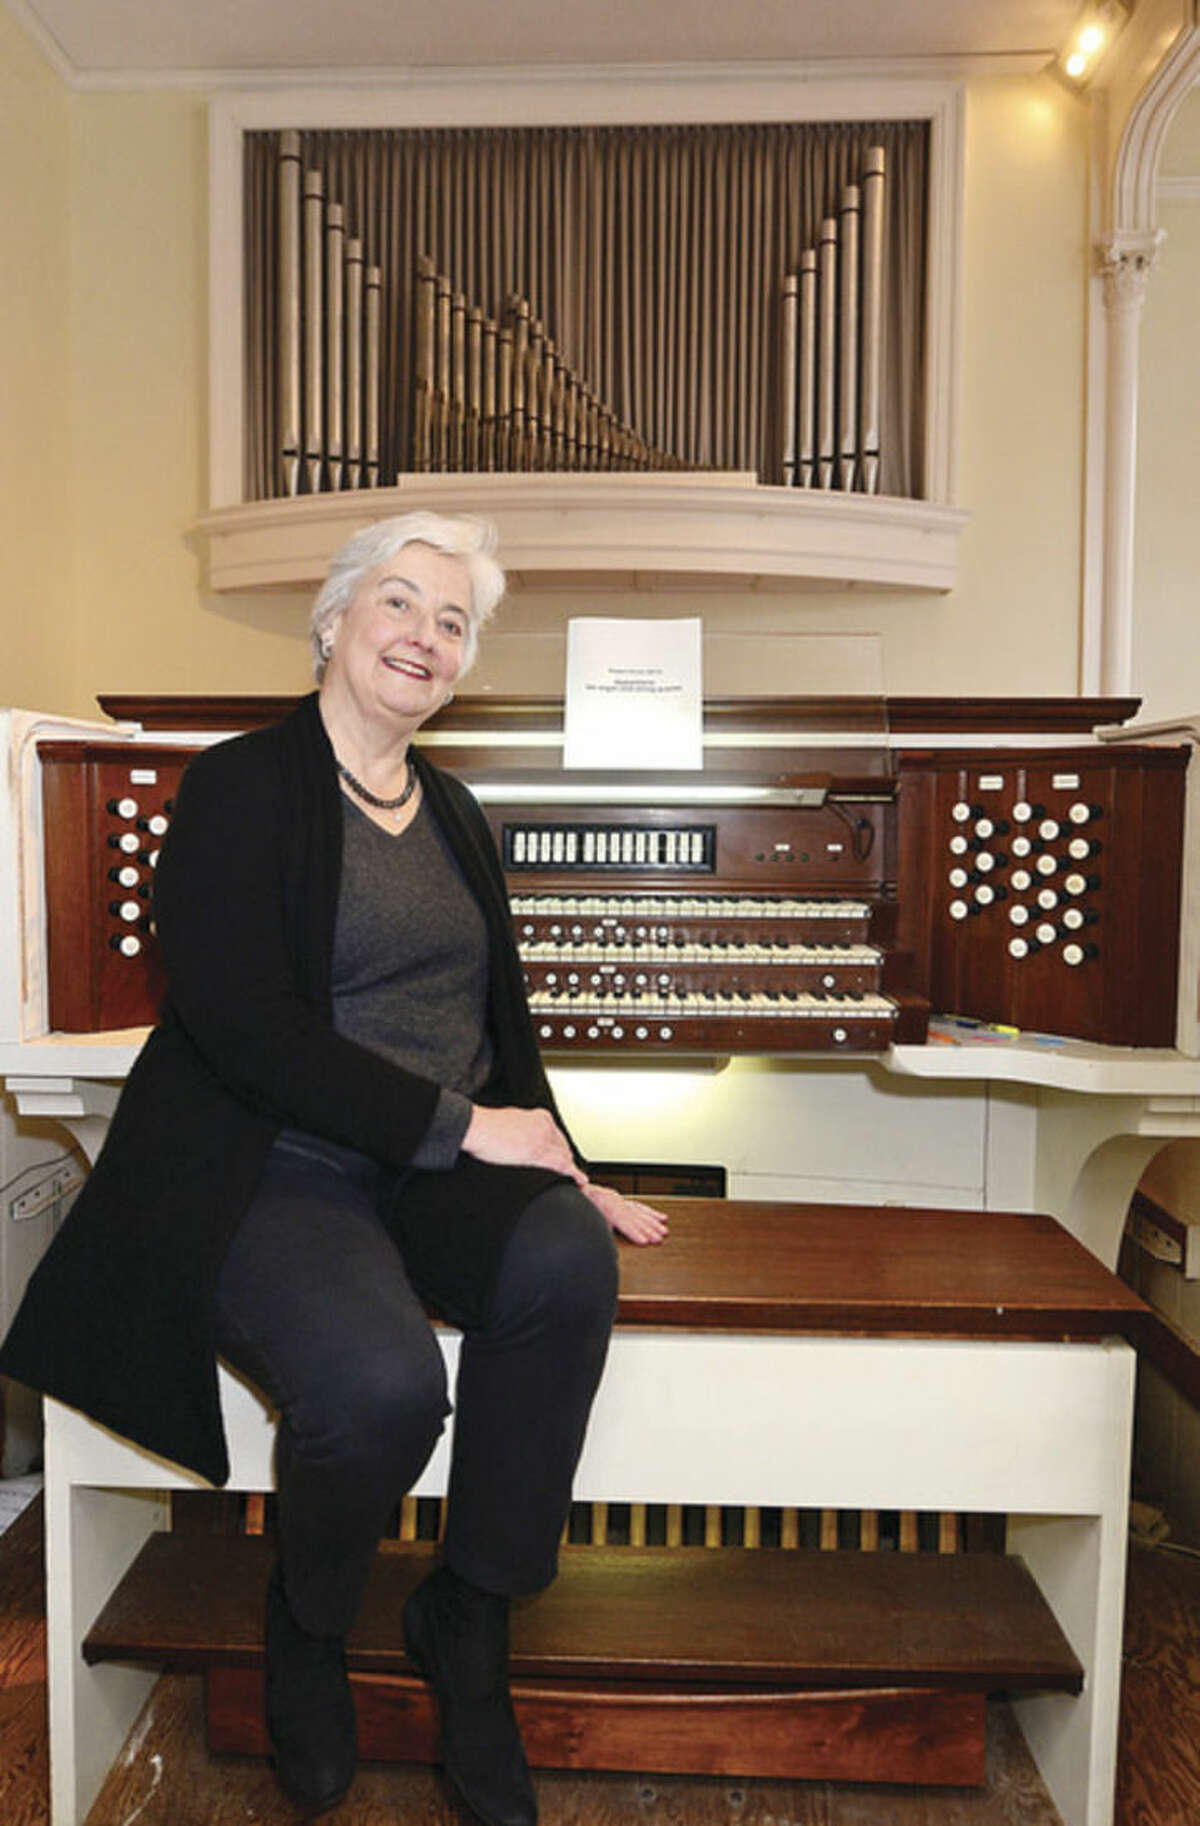 Hour photo / Erik Trautmann Organist Eileen Hunt and The Congregational Church at Green's Farms will be celebrating the 50th anniversary of their organ, christened Cecilia Rose after the patron saint of music, on May 10 with a special performance by Hunt of composer Robert Sirota's "Apparitions for Organ and String Quartet."